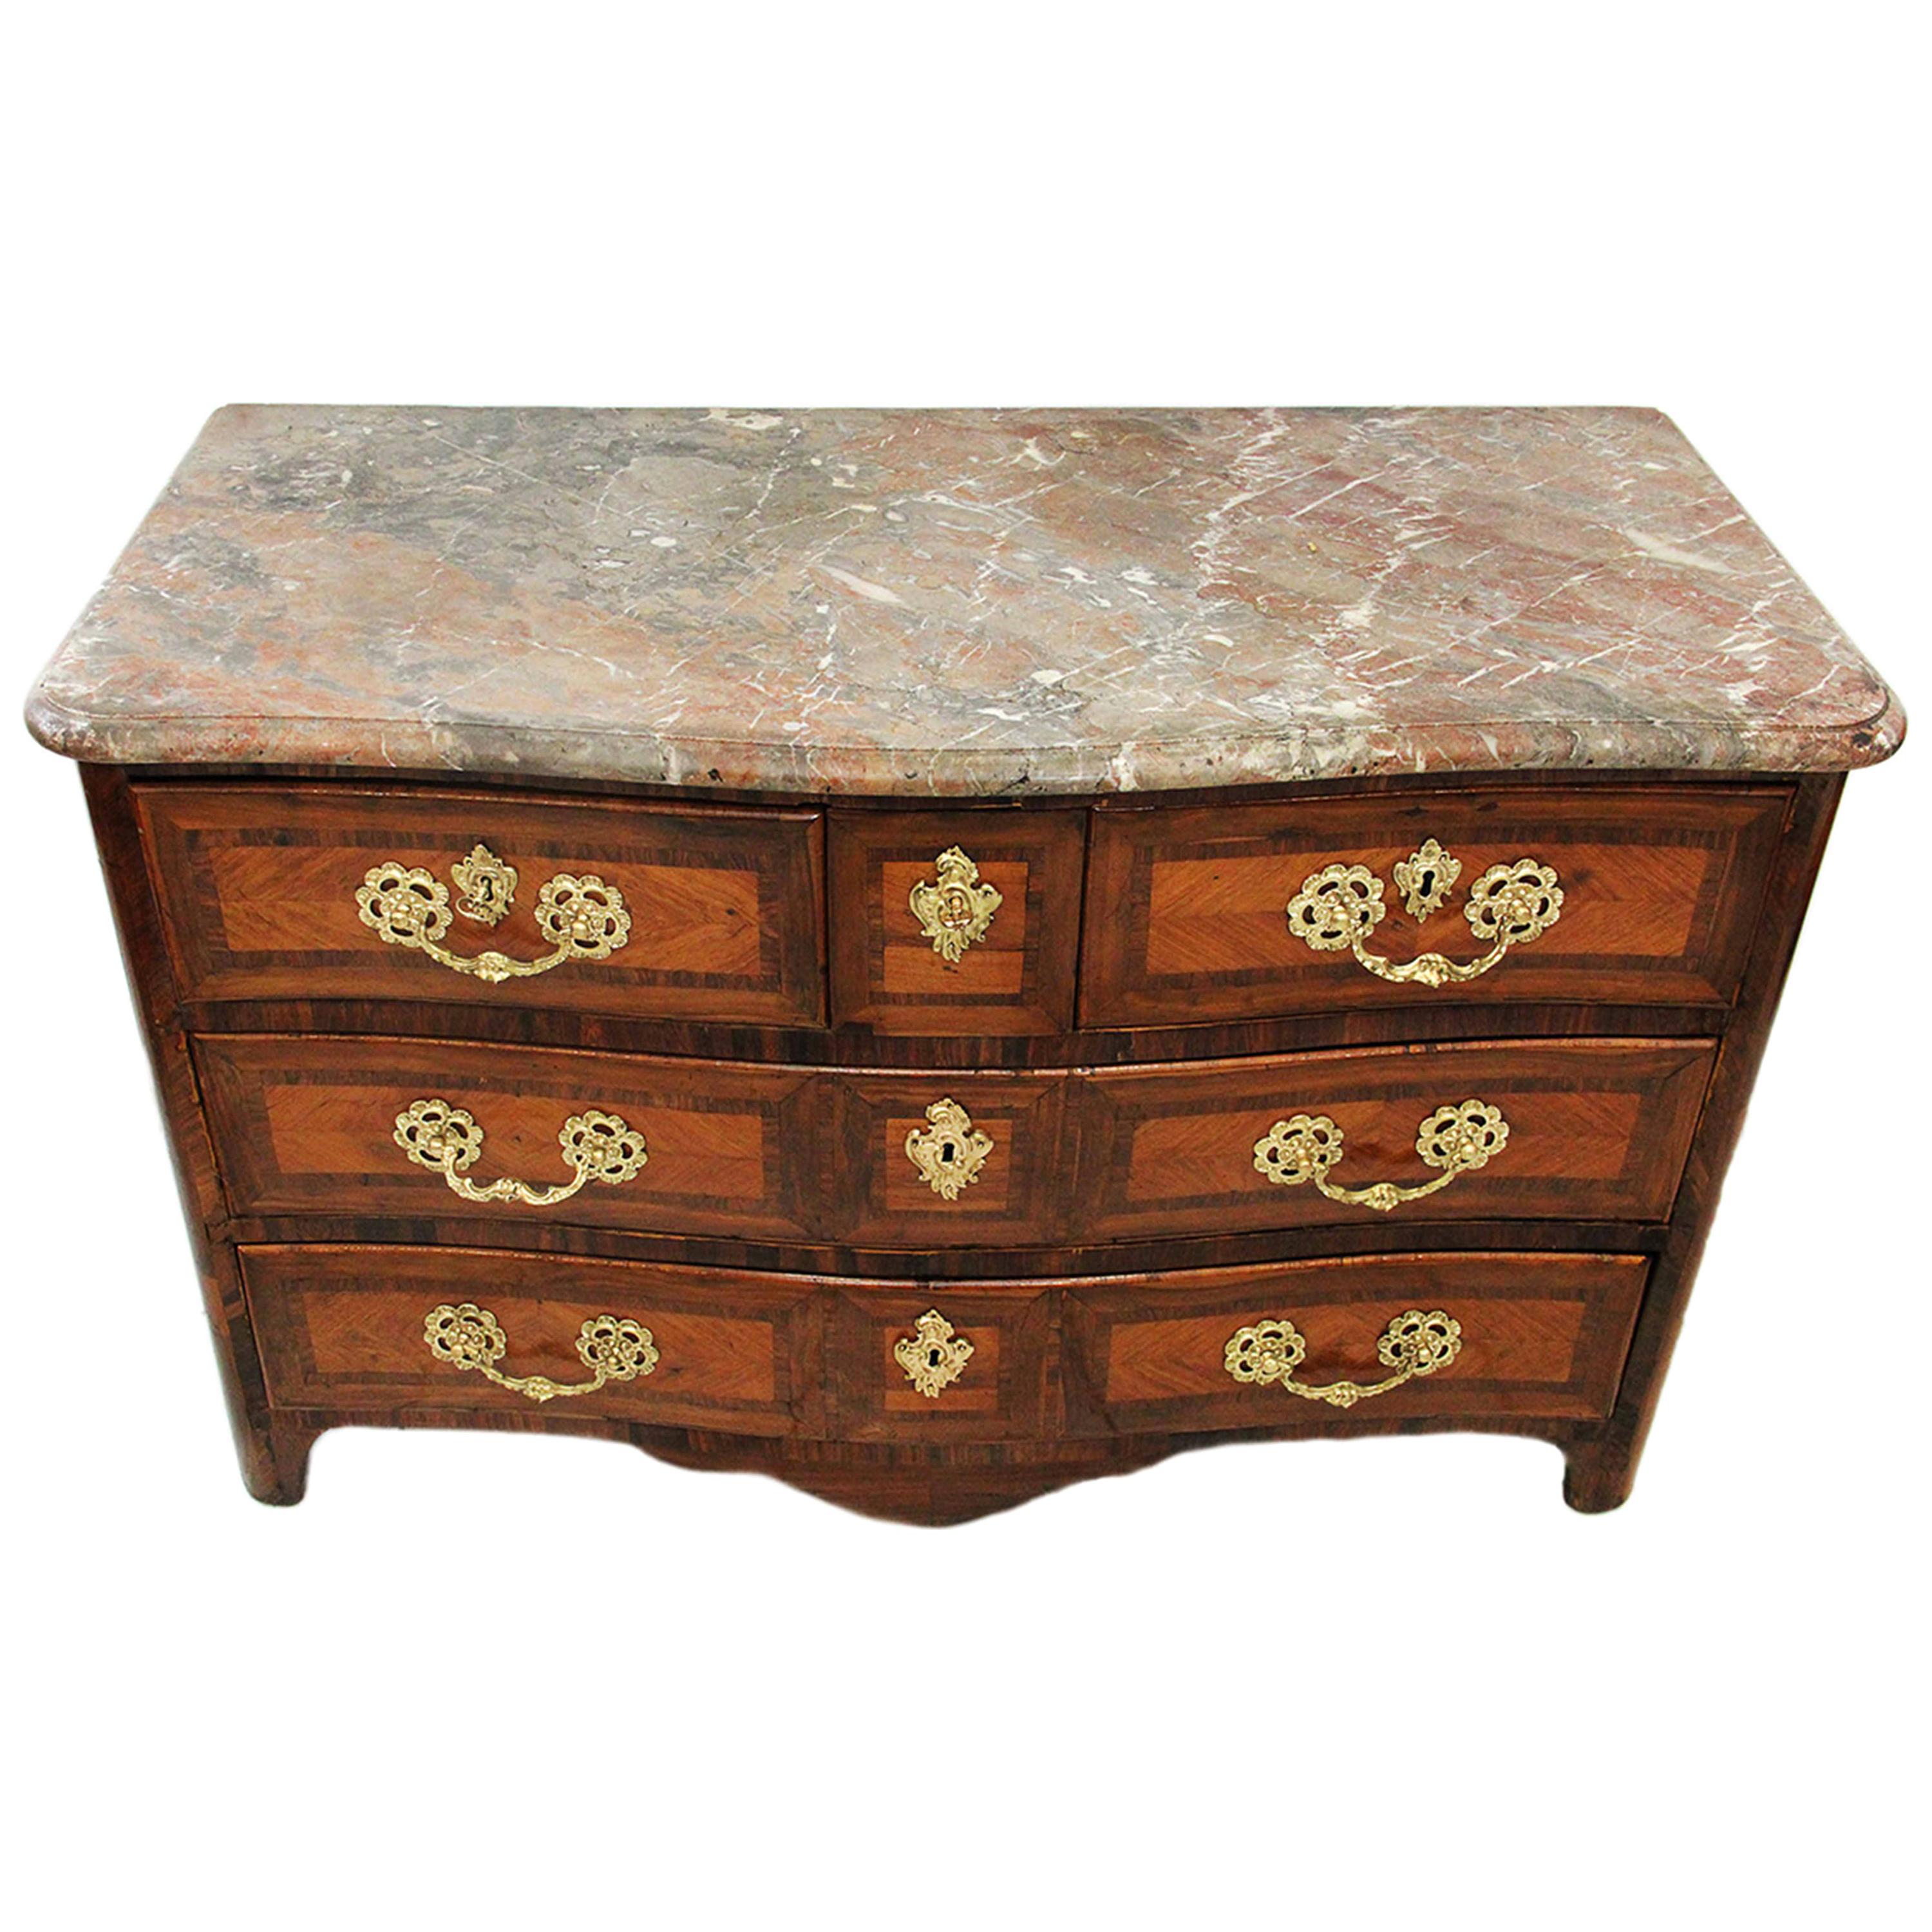 18th Century Commode Stamp Charles Chevallier Marble Top and Bronze Ornaments For Sale